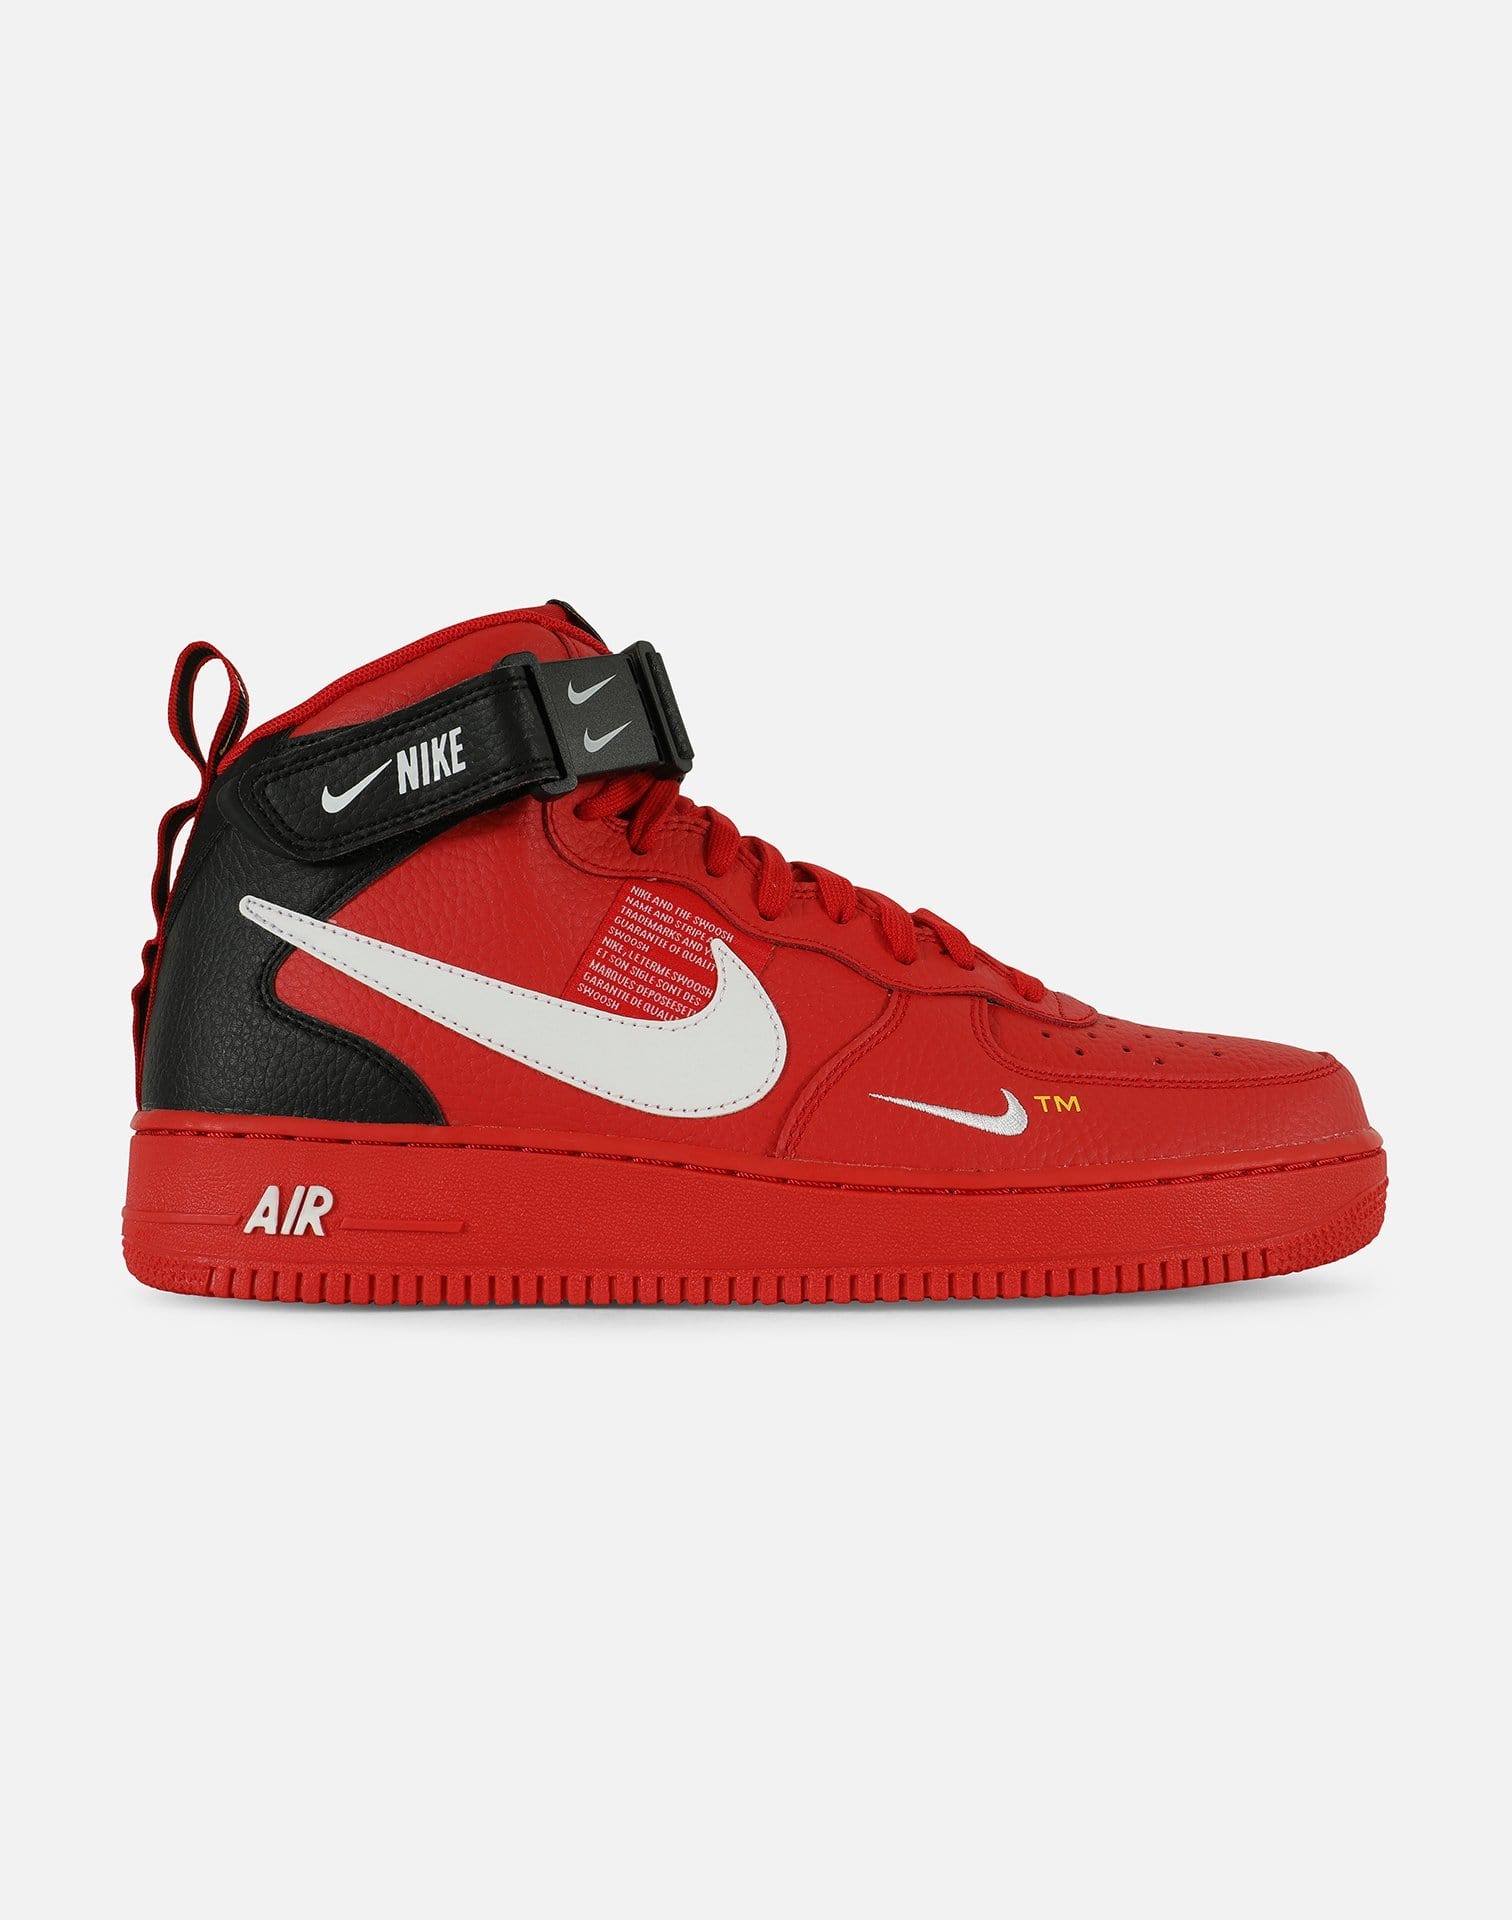 Nike AIR FORCE 1 MID '07 UTILITY – DTLR